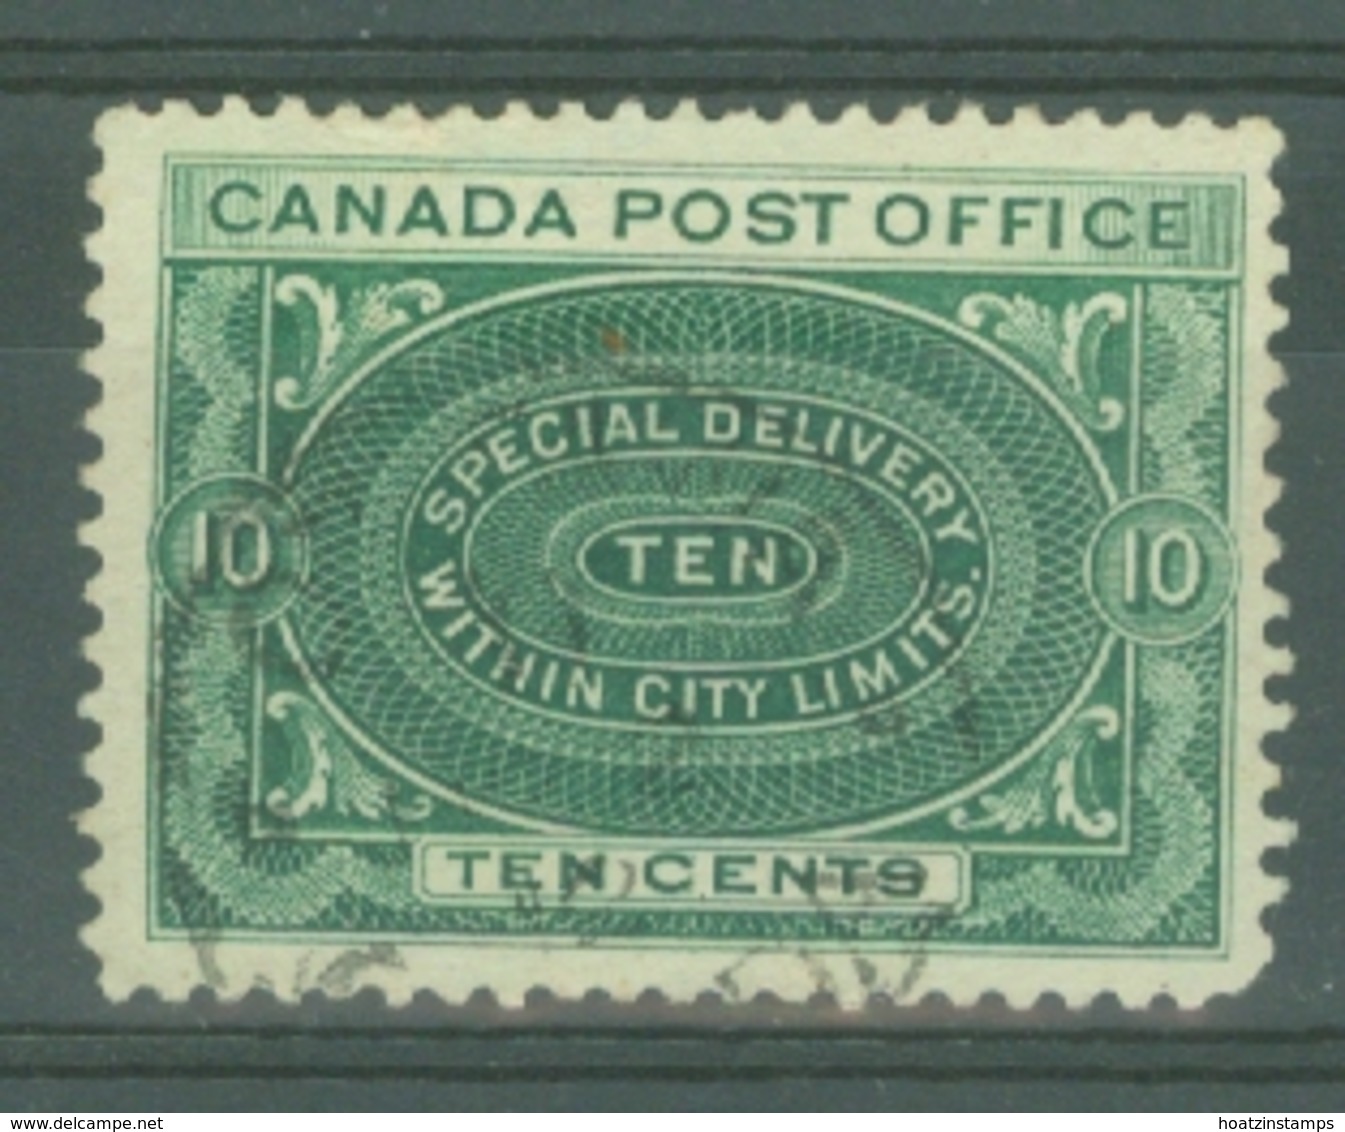 Canada: 1898/1920   Special Delivery    SG S1    10c  Blue-green  Used - Correo Urgente